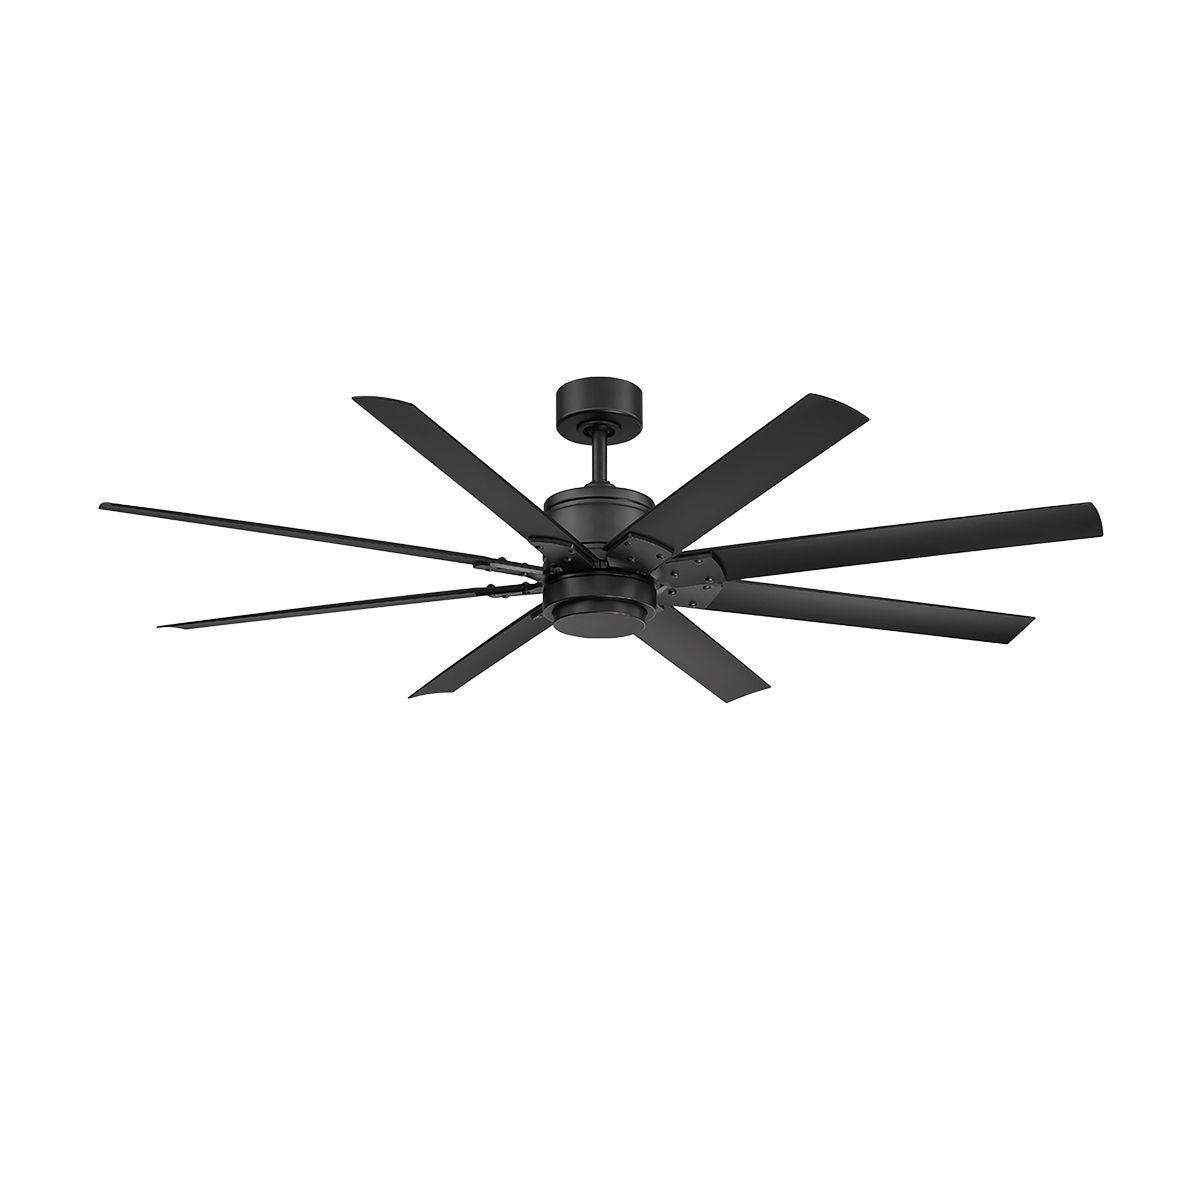 Renegade 52 Inch Windmill Outdoor Smart Ceiling Fan With Light And Remote, Matte Black Finish